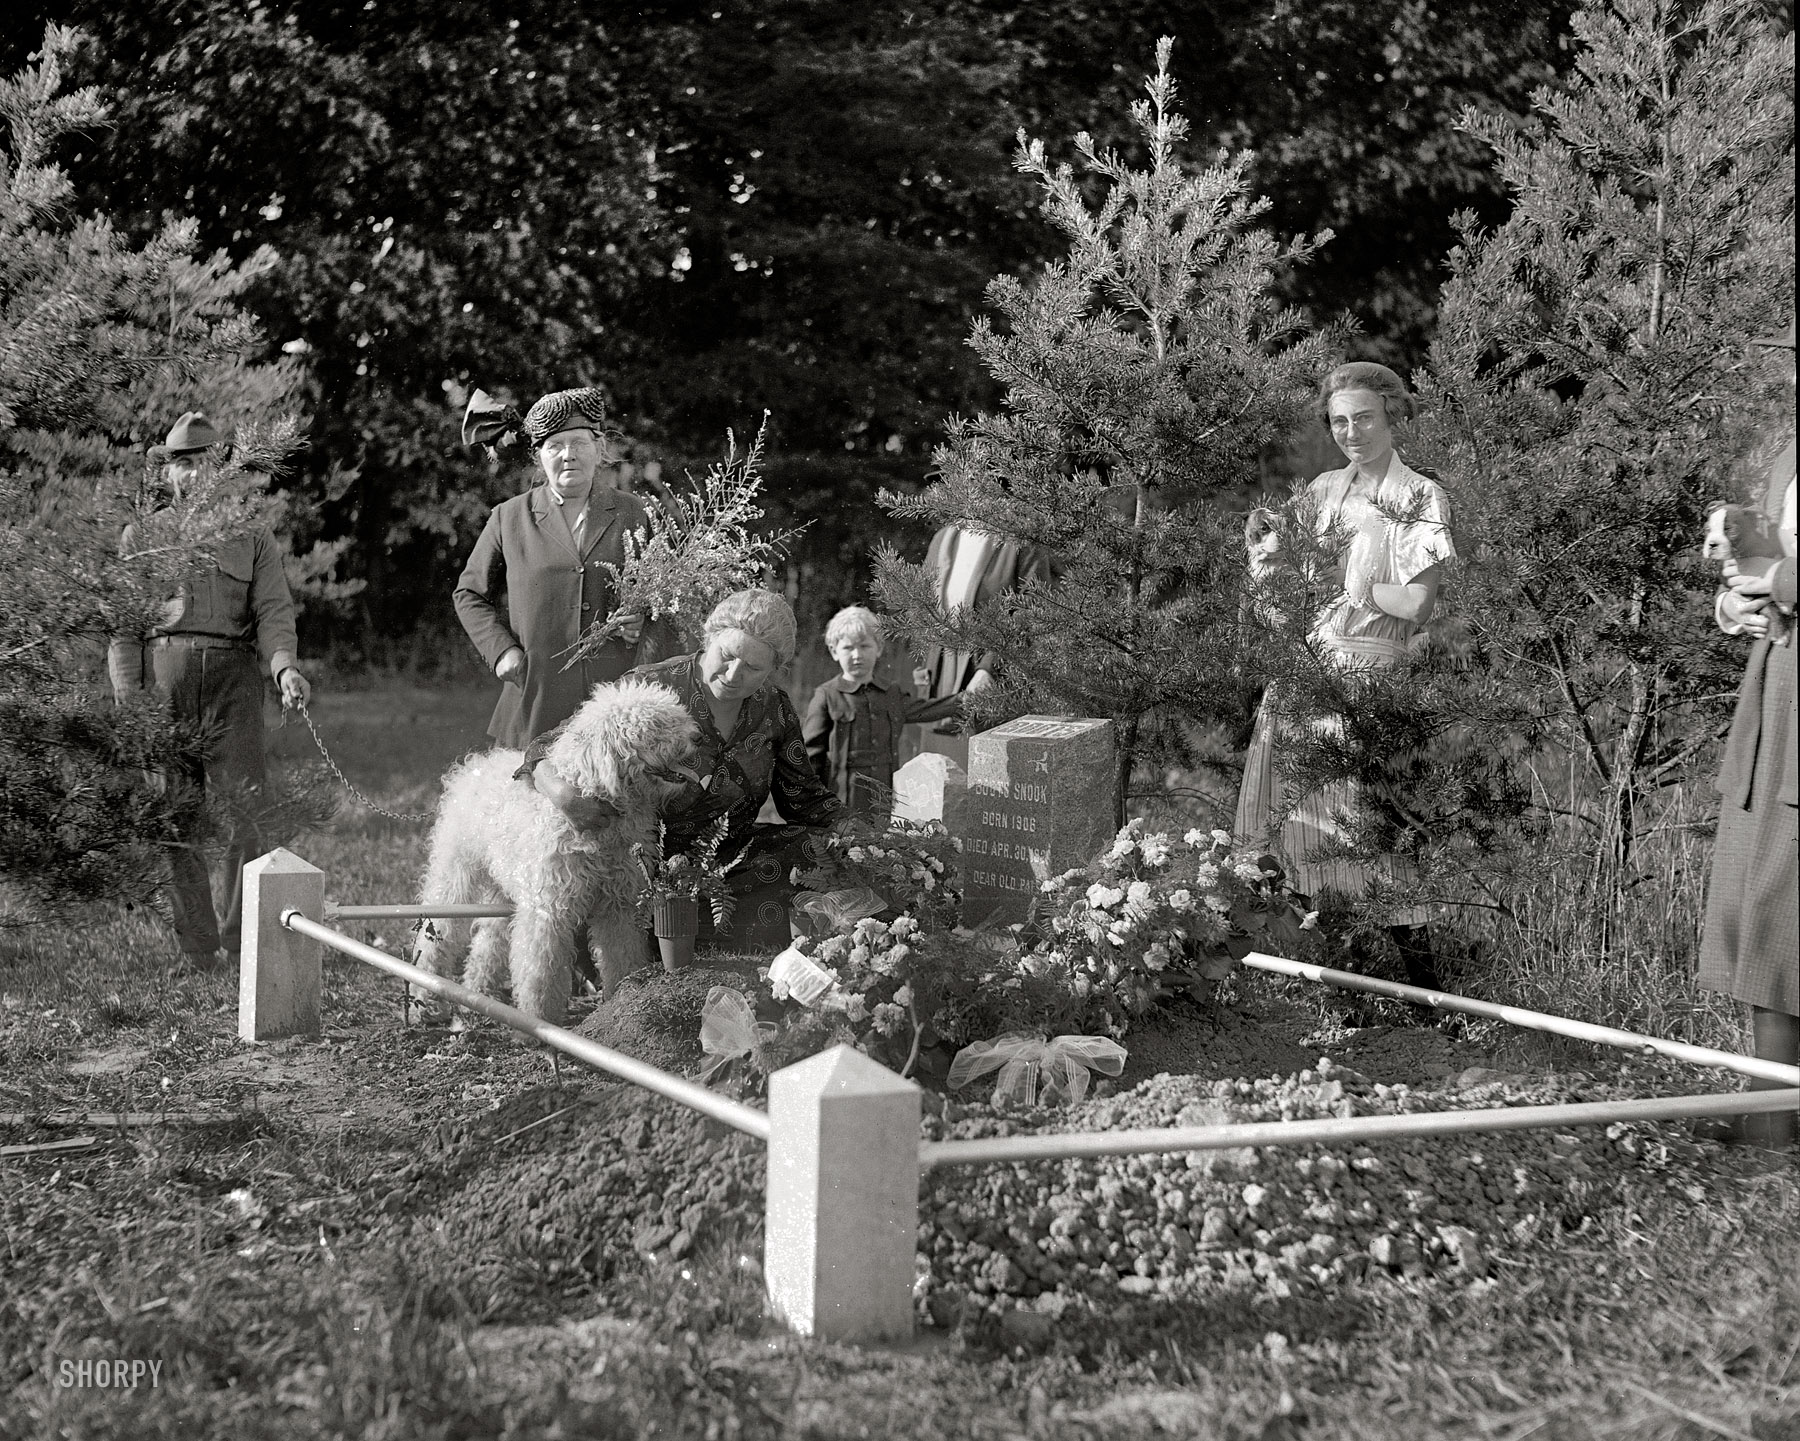 October 7, 1921. "Dog funeral." Aspen Hill Cemetery, final resting place for one Boots Snook, "dear old pal" of Mrs. Selma Snook of Washington. Today's funeral is for the recently departed Buster. Harris & Ewing glass negative. View full size.